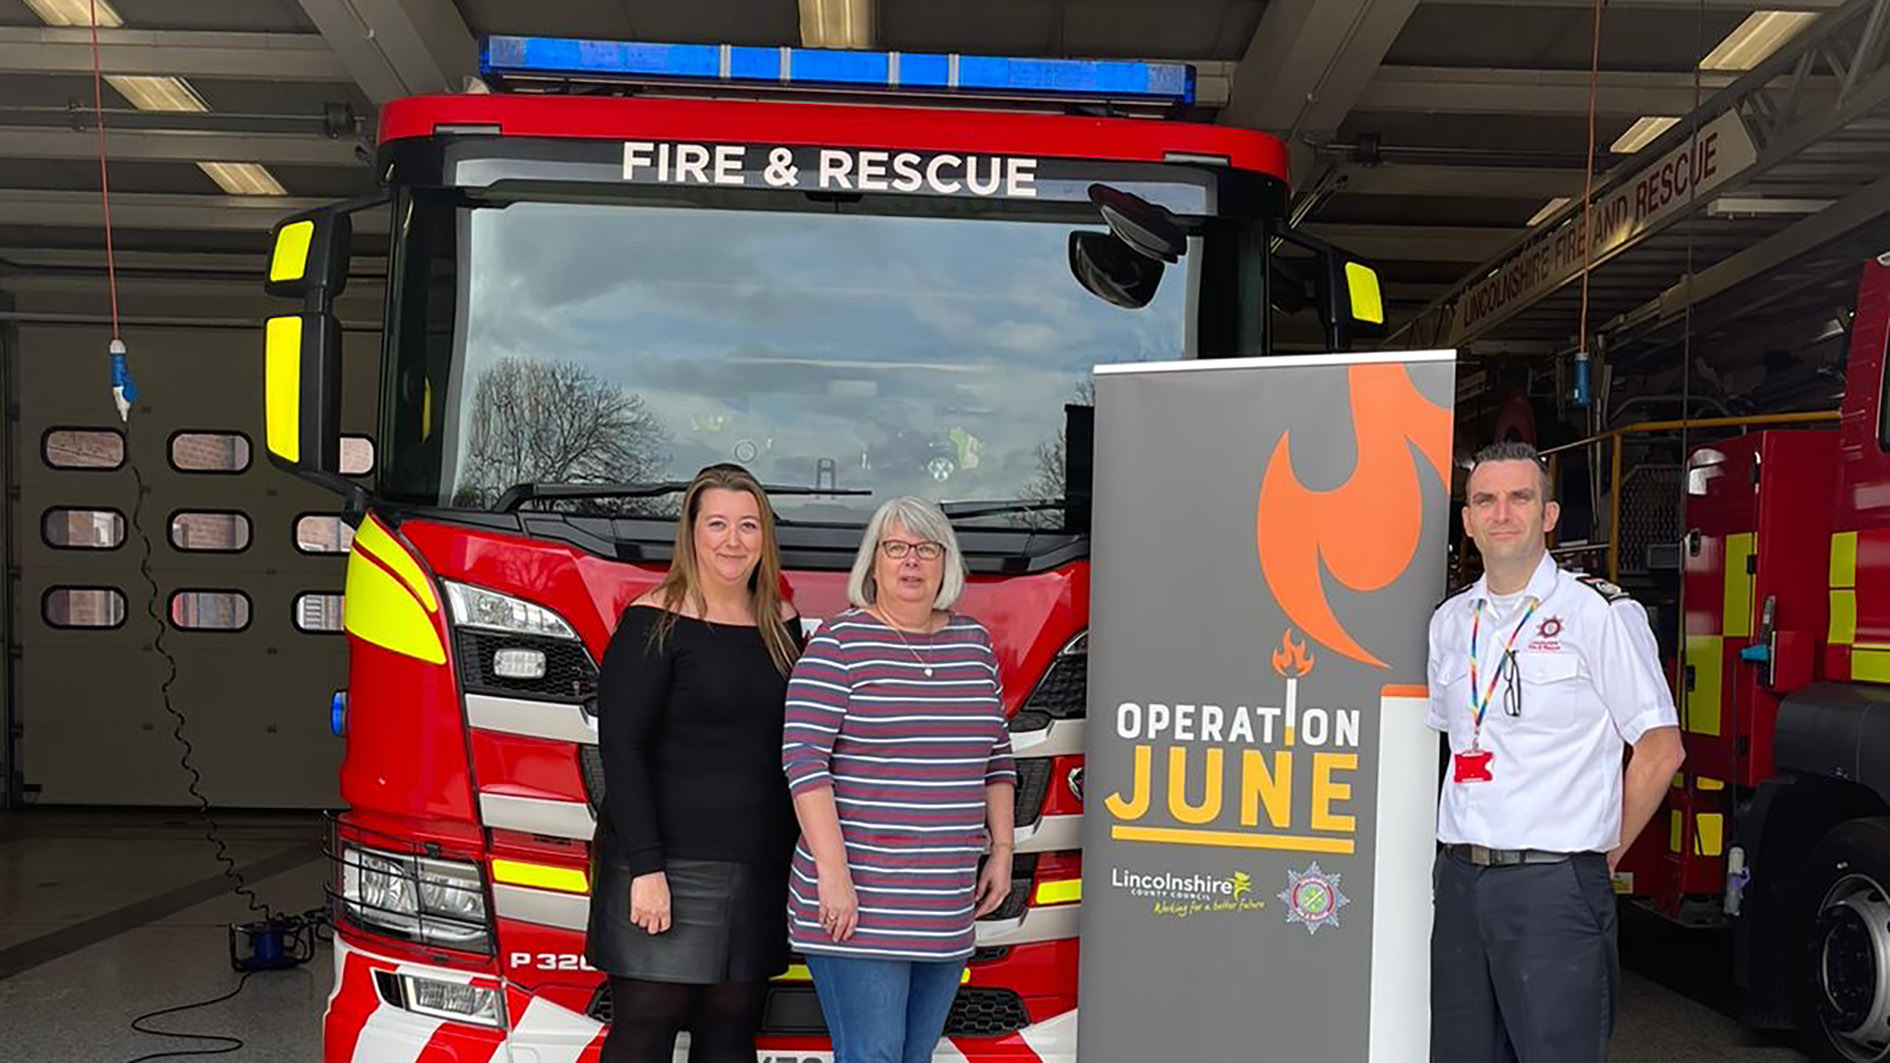 The minds behind Operation June in front of a fire engine